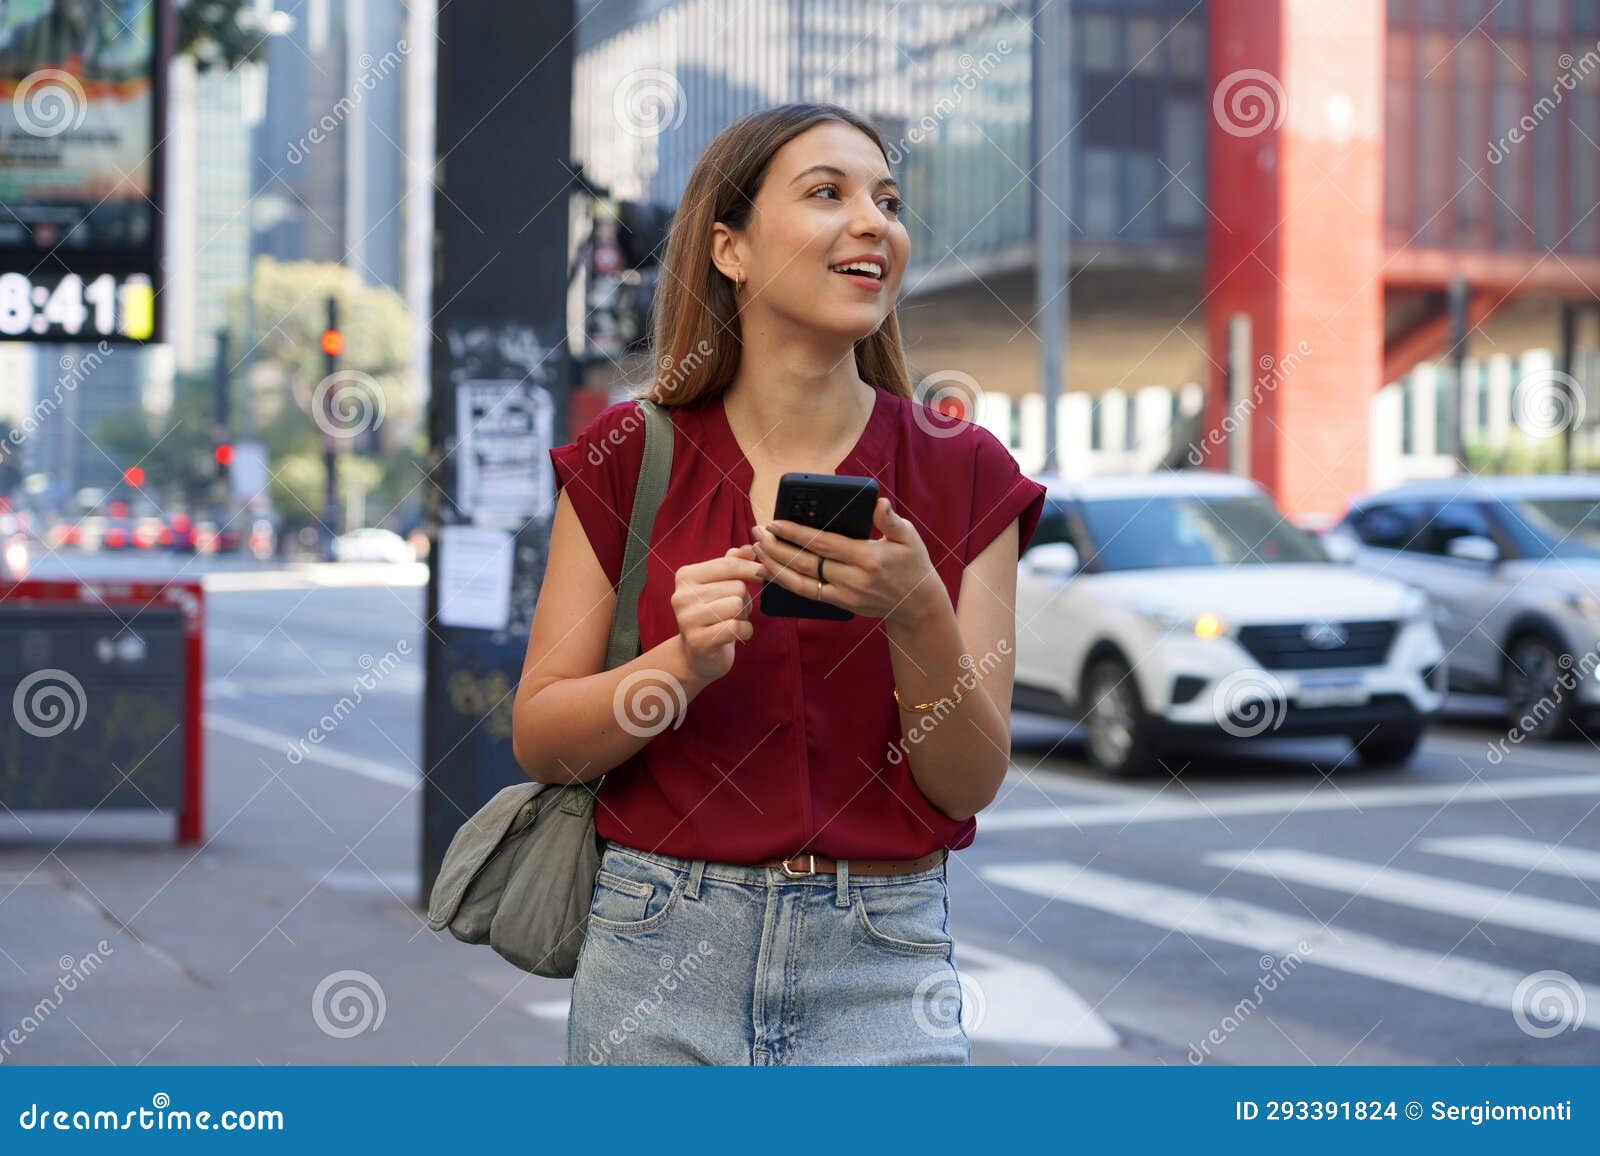 close-up of brazilian business woman hail a vehicle using mobile app looking to the side on paulista avenue, sao paulo, brazil